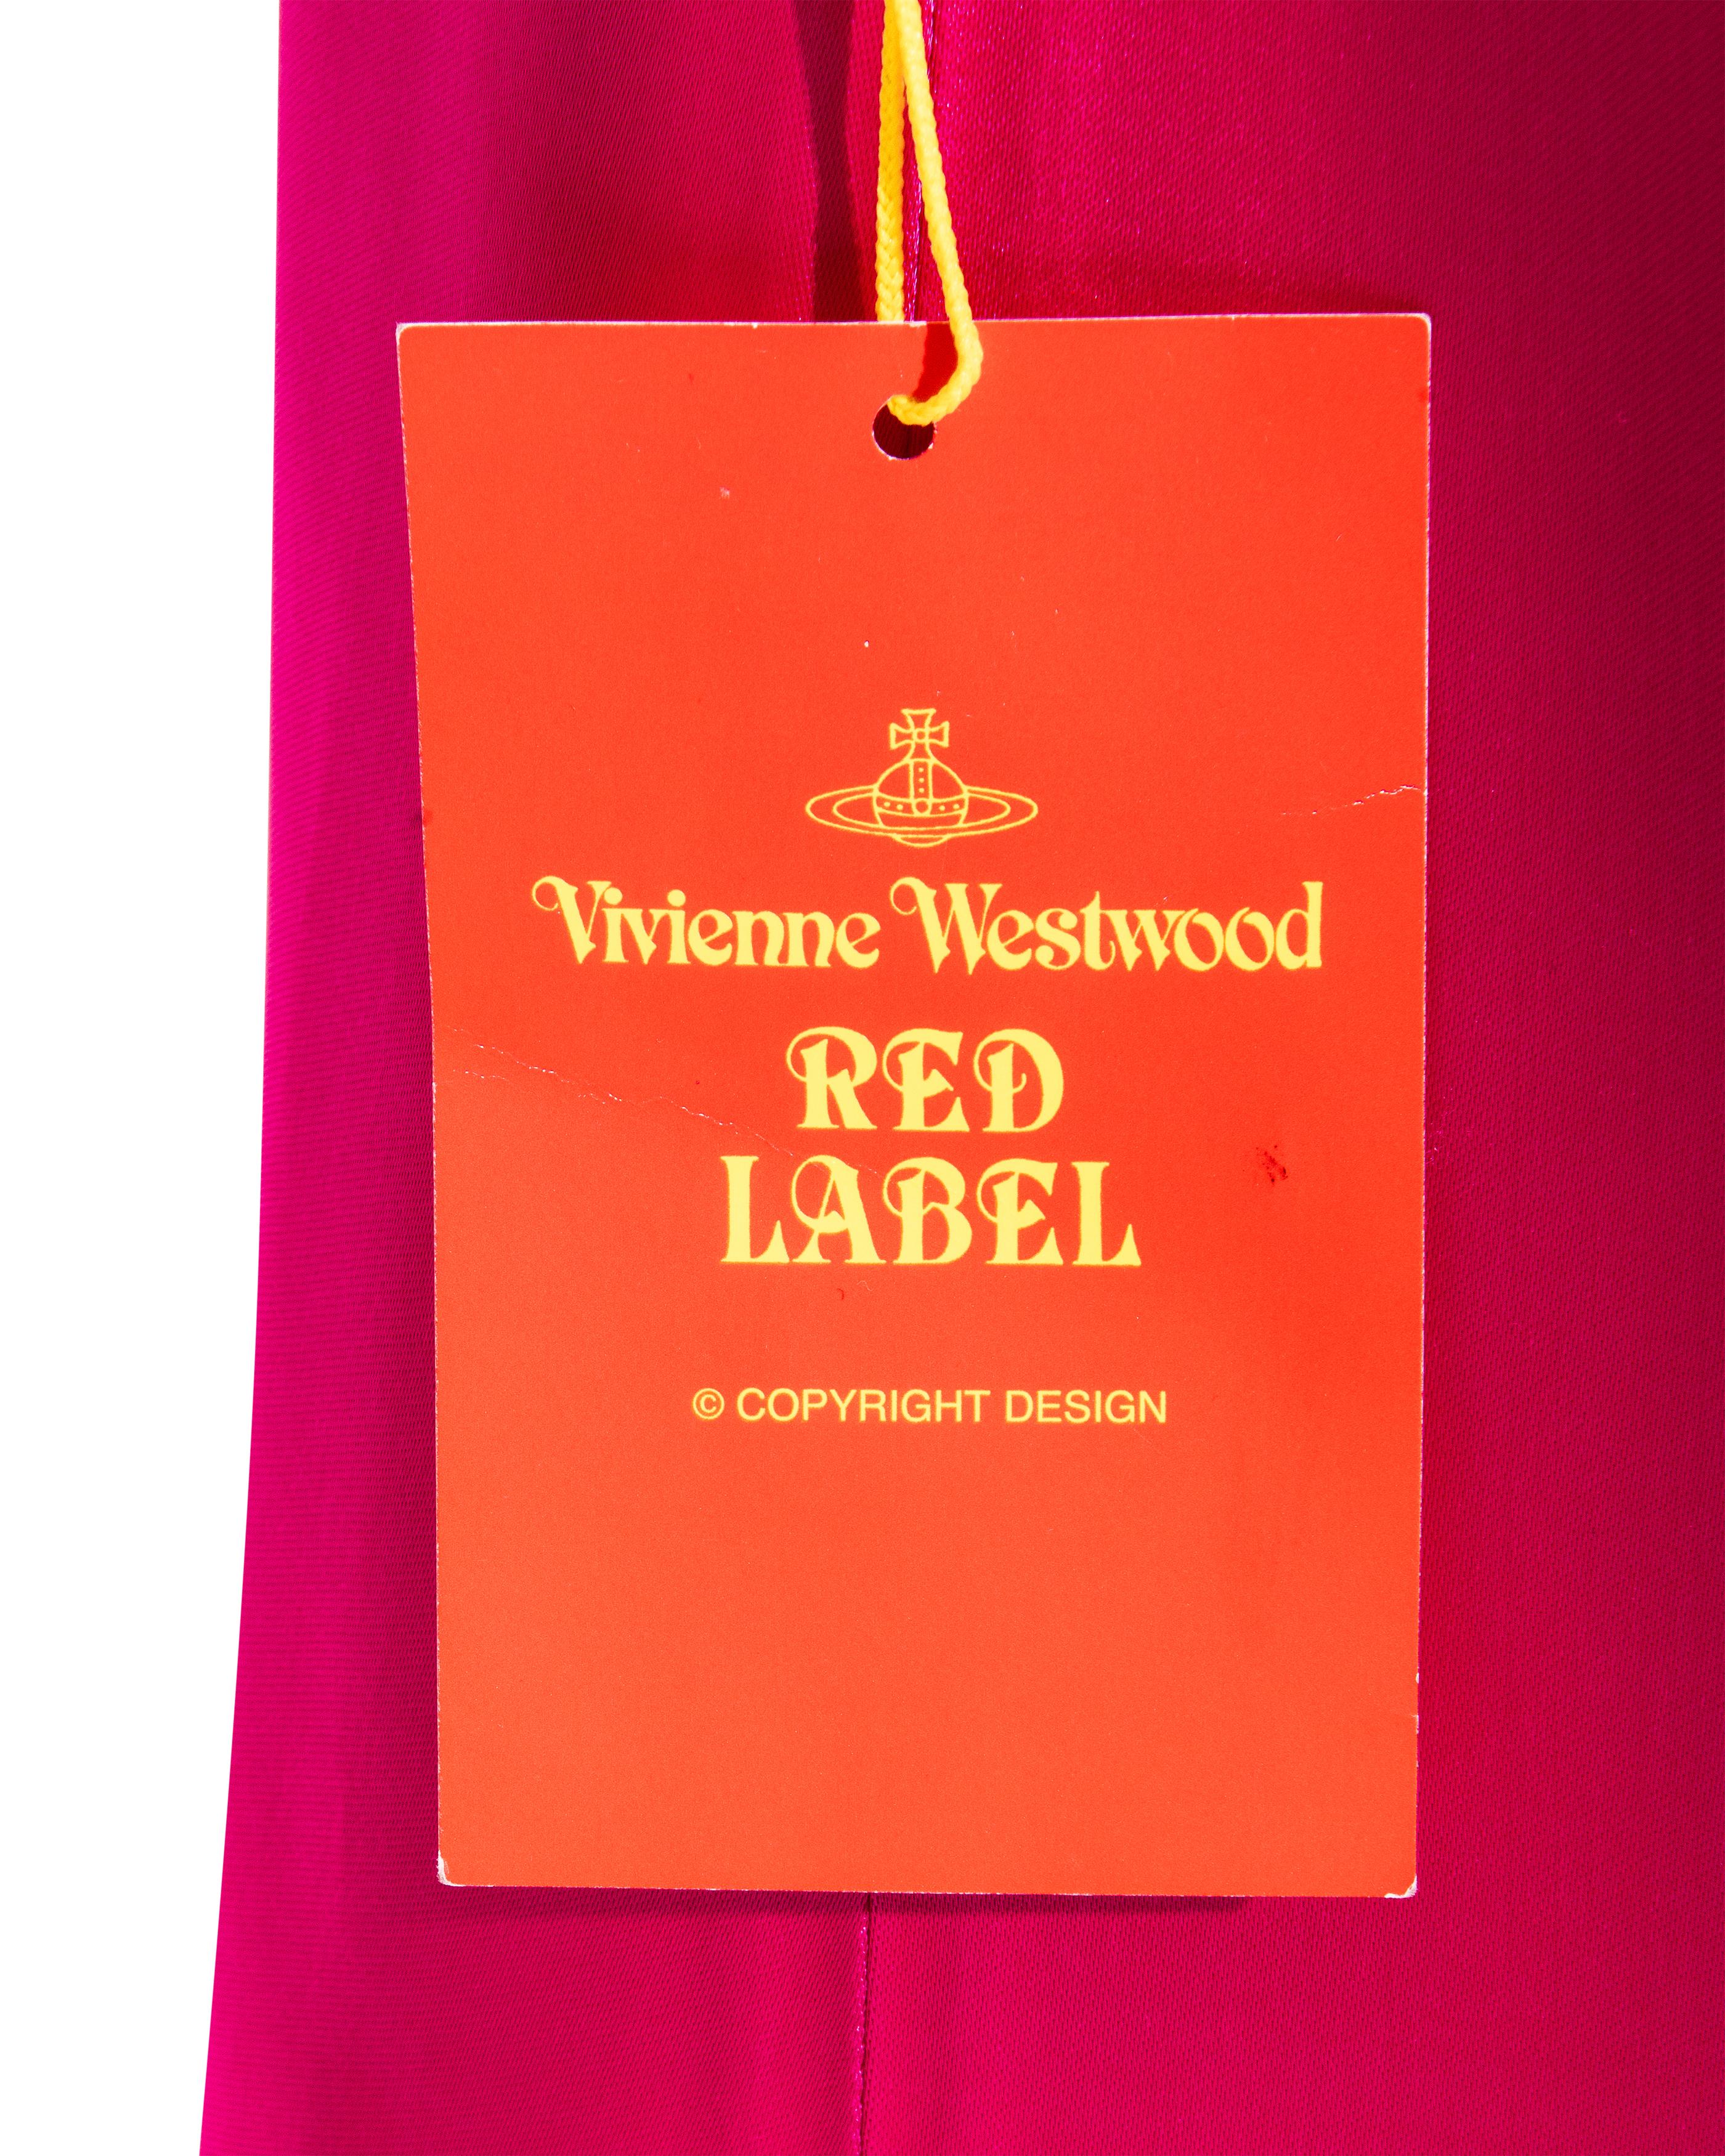 S/S 1999 Vivienne Westwood Red Label Hot Pink Silk Gown with Front Ties For Sale 2